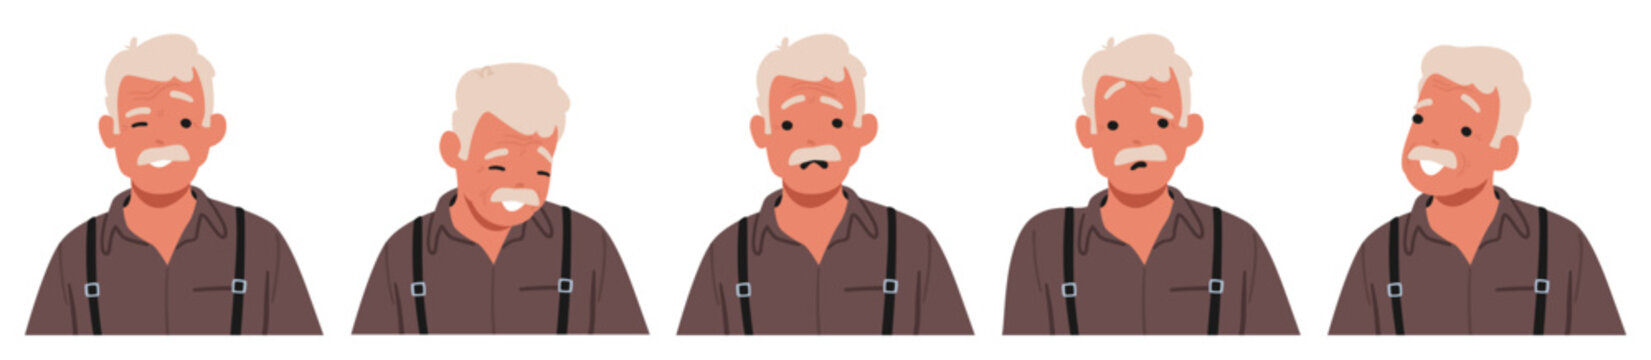 Old Mustached Man Face Emotions. Wrinkled Senior Male Character Wink Eye, Feels Joy, Shy, Confusion or Sadness